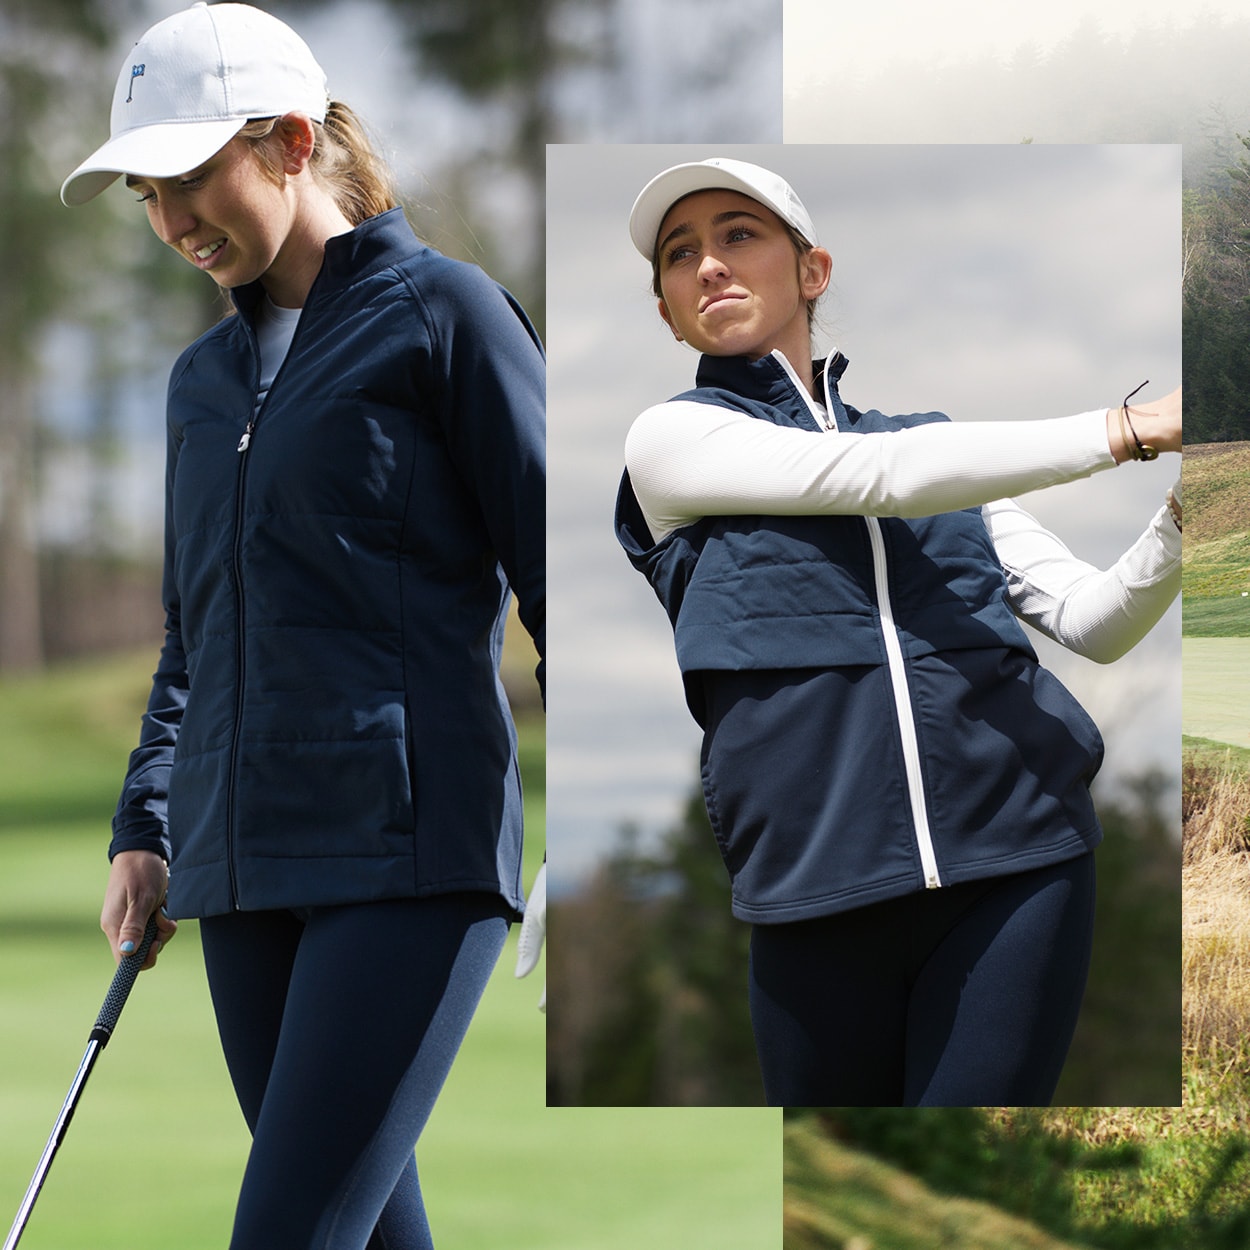 https://www.footjoy.ca/on/demandware.static/-/Library-Sites-FootJoySharedLibrary/default/dwa24ce896/Collections/FJ_23_Site_ThermoSeries_X-Cat_Womens.jpg